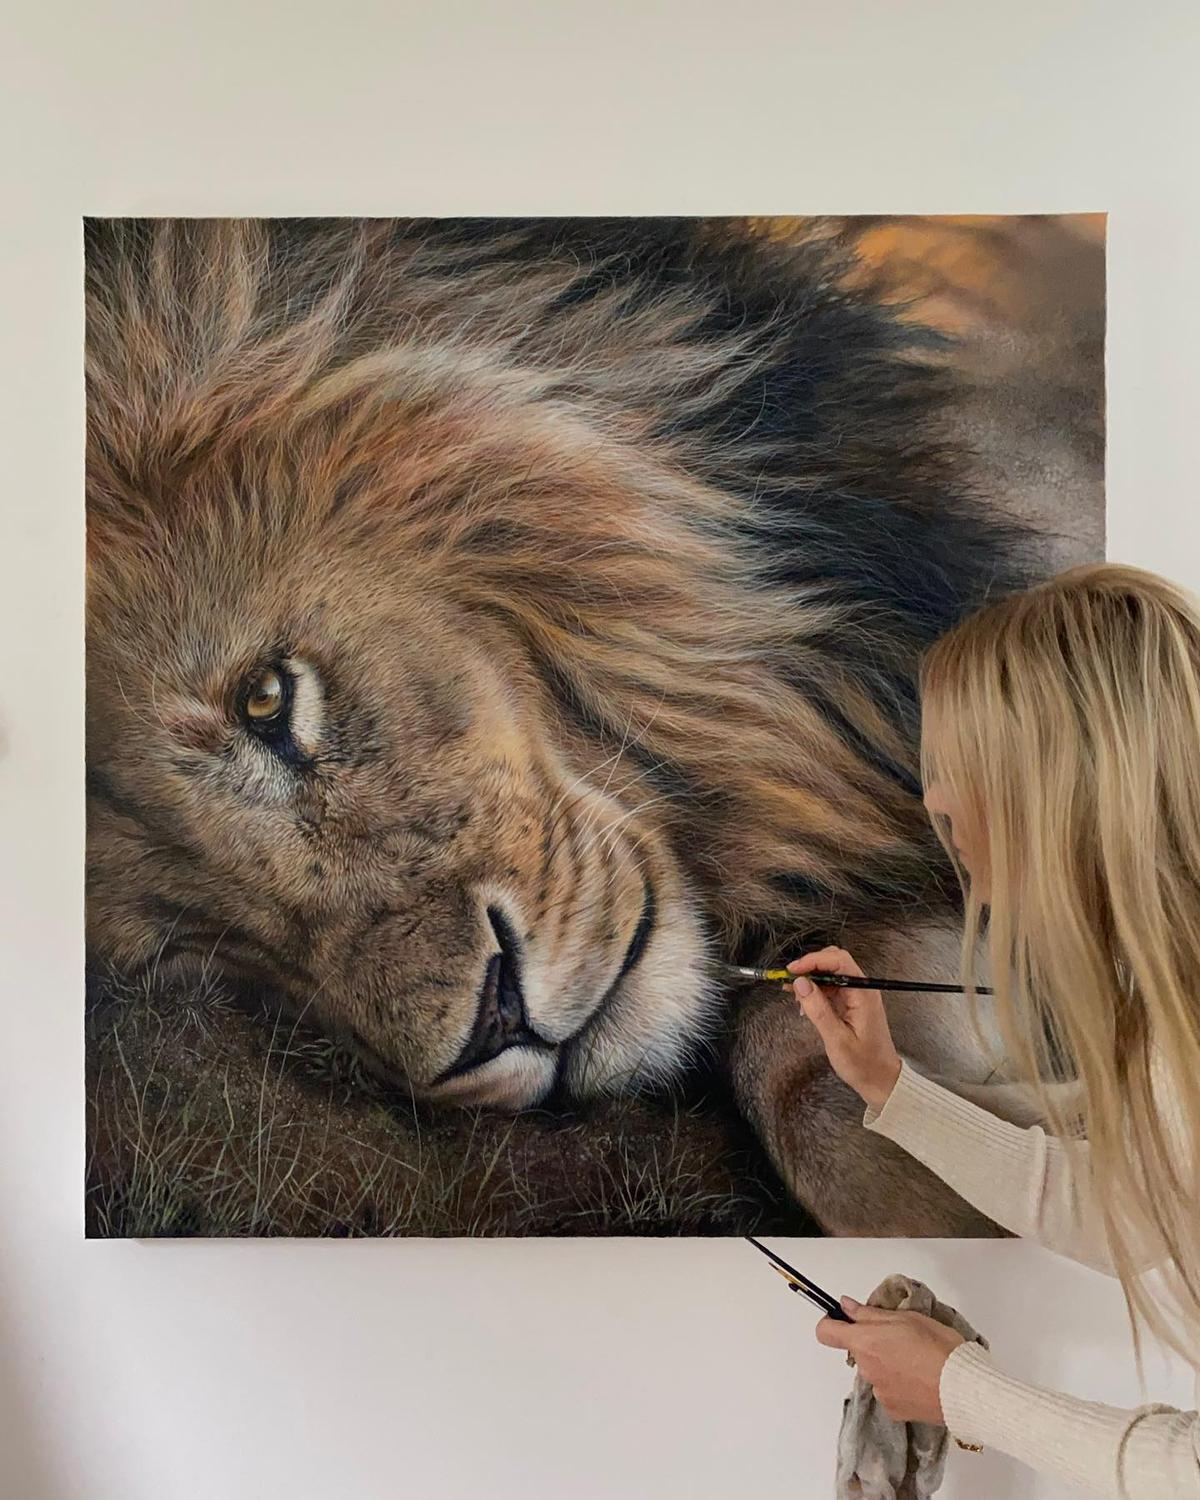 Recent acrylic painting of a male lion by Julie Rhodes. (Courtesy of <a href="https://www.julierhodes.com/">Julie Rhodes</a>)